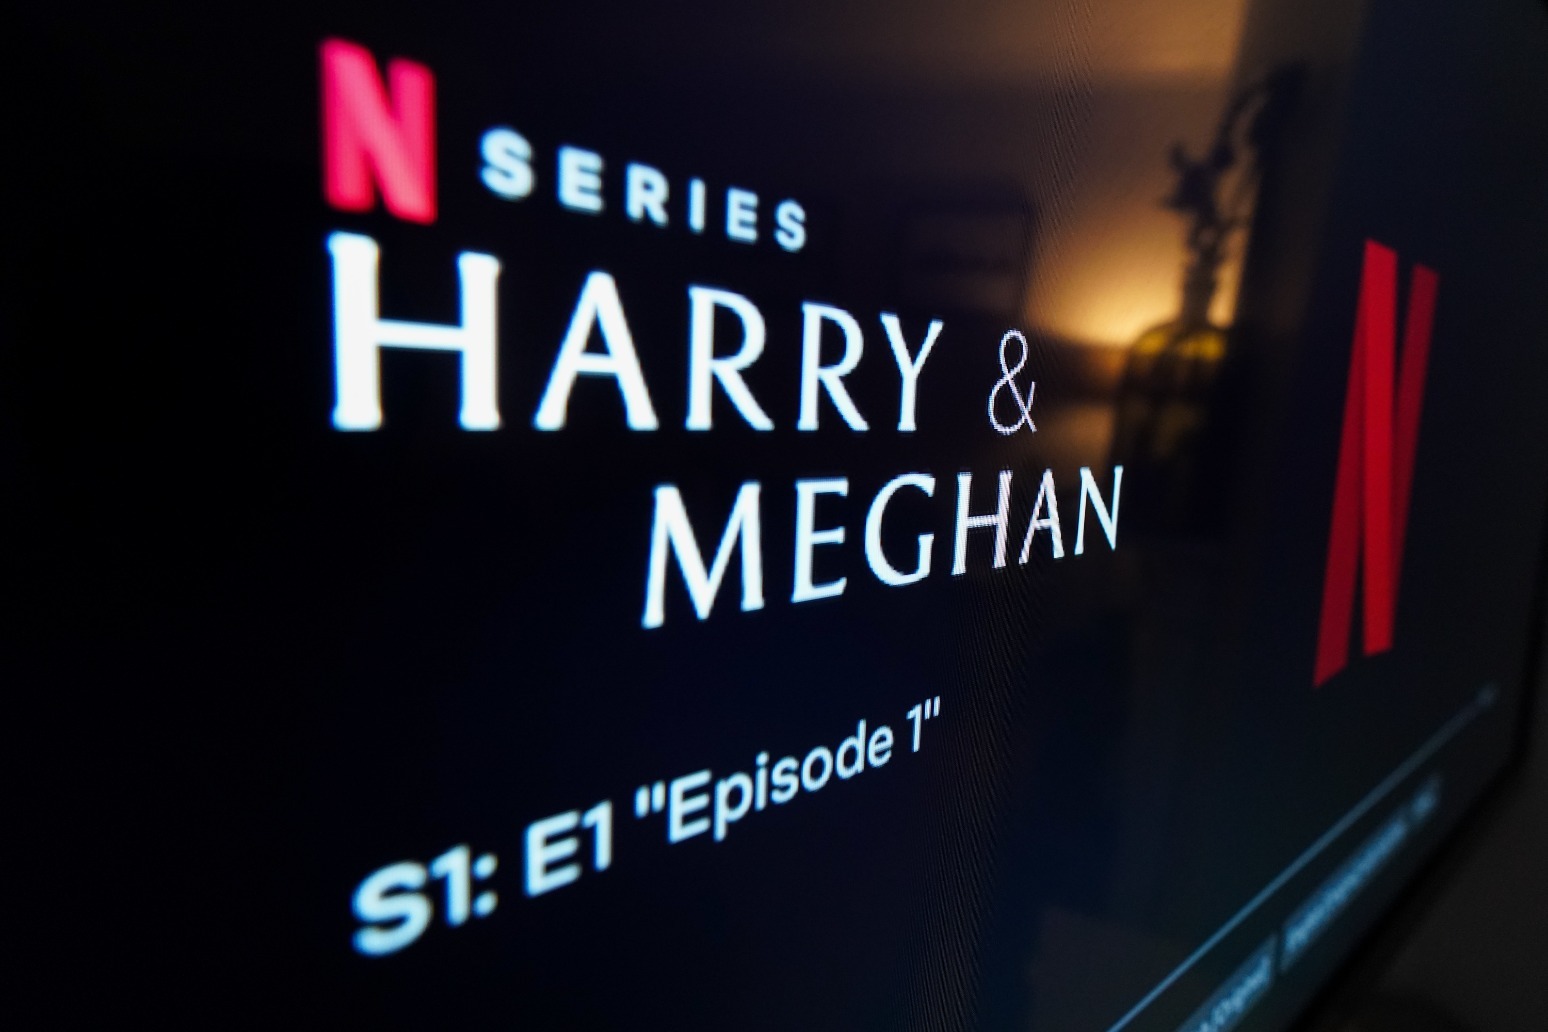 Words missing from Queen’s 21st birthday pledge in Harry and Meghan’s Netflix show 